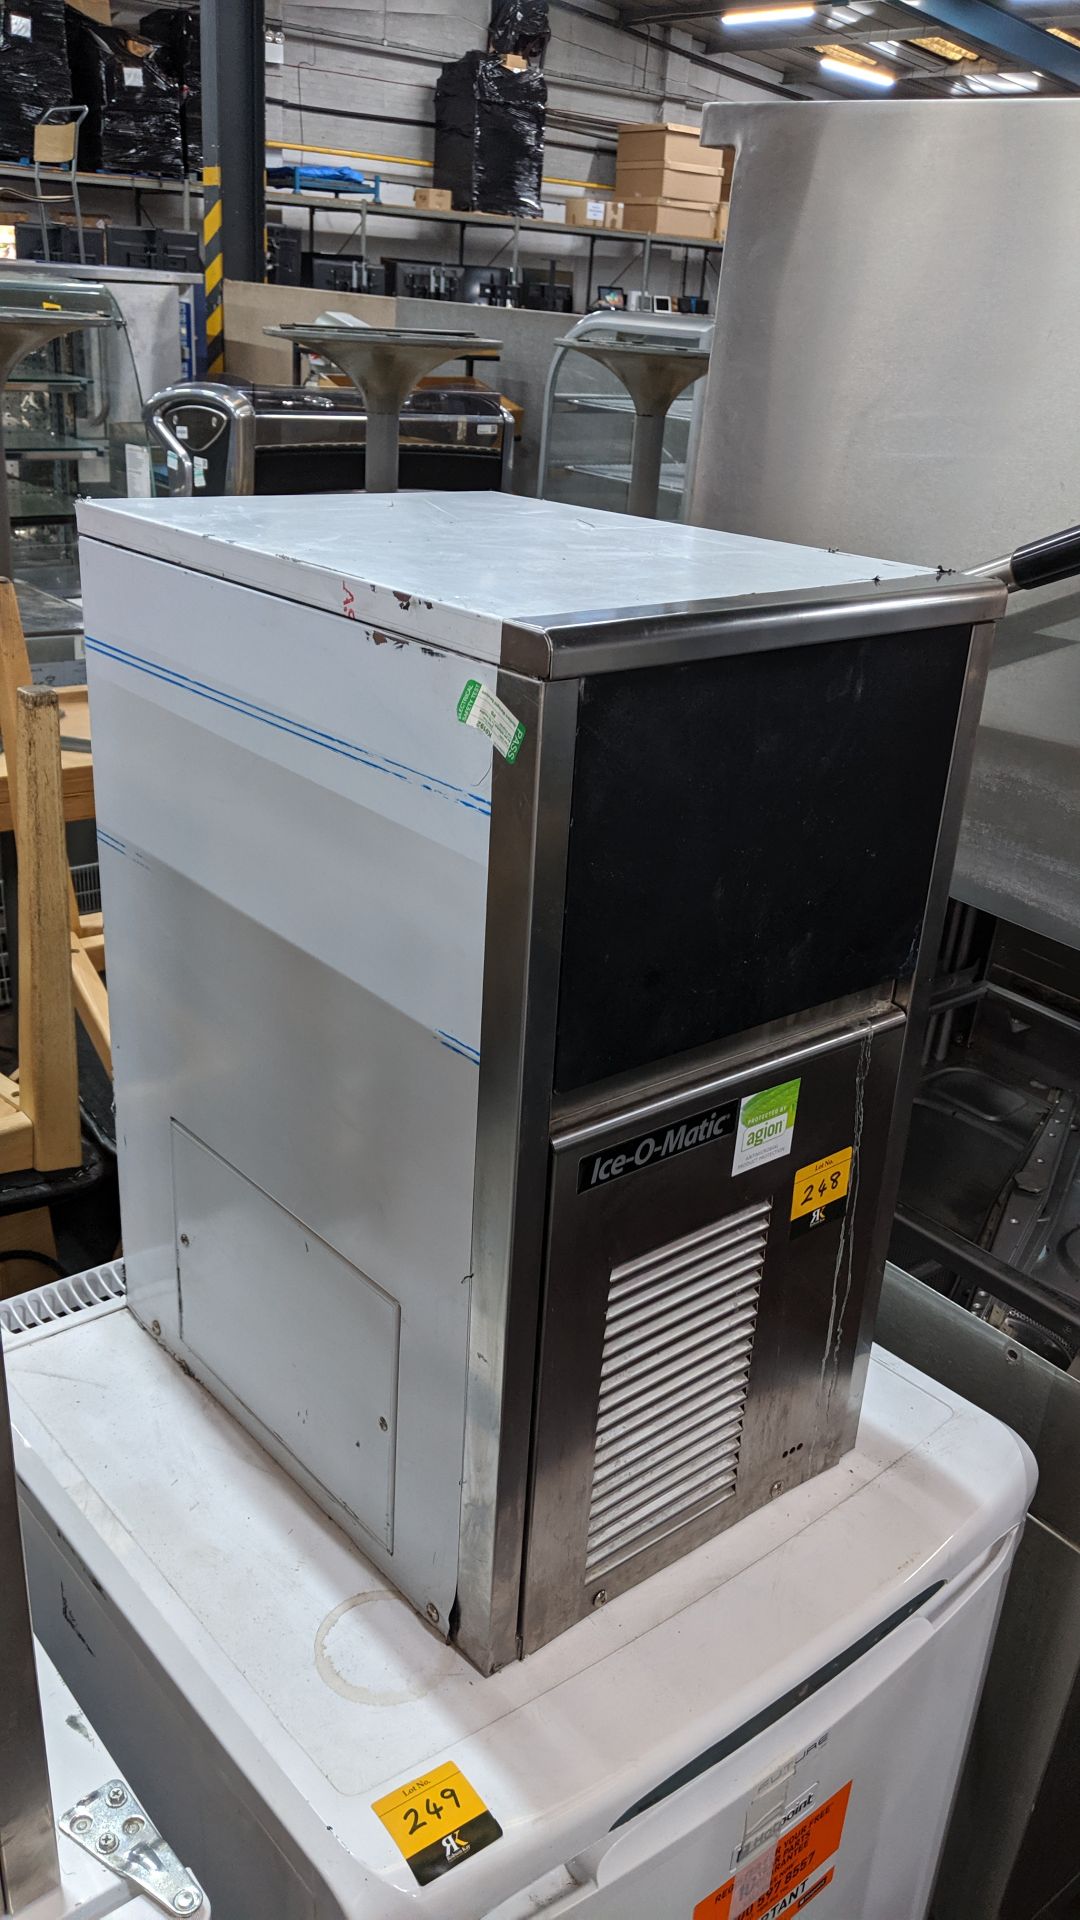 Ice-o-matic stainless steel compact commercial ice machine. IMPORTANT: Please remember goods